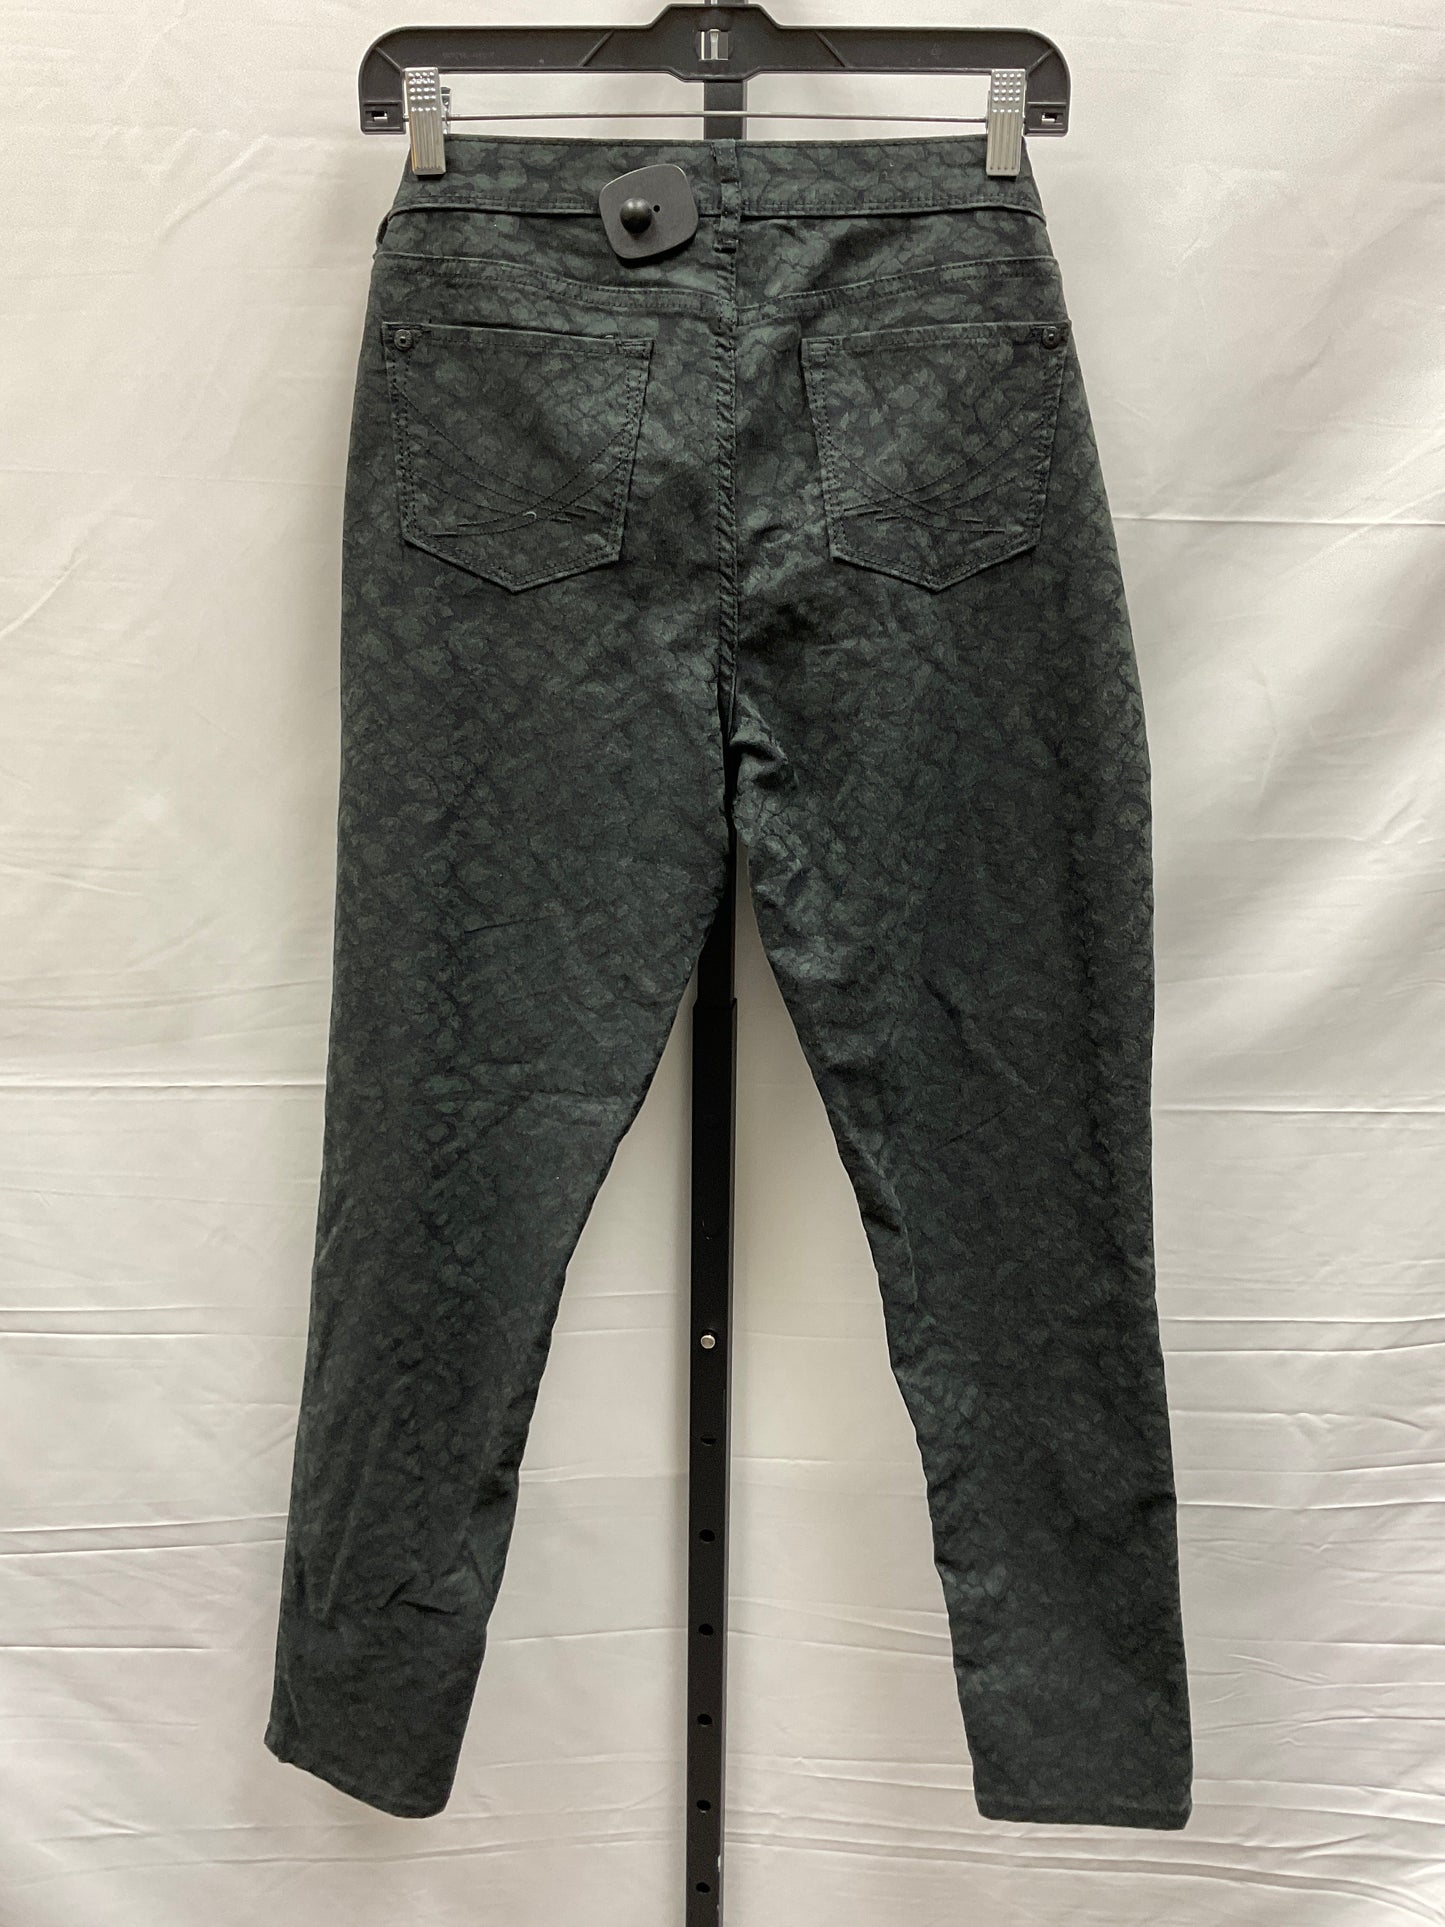 Black & Green Jeans Jeggings Simply Vera, Size 8